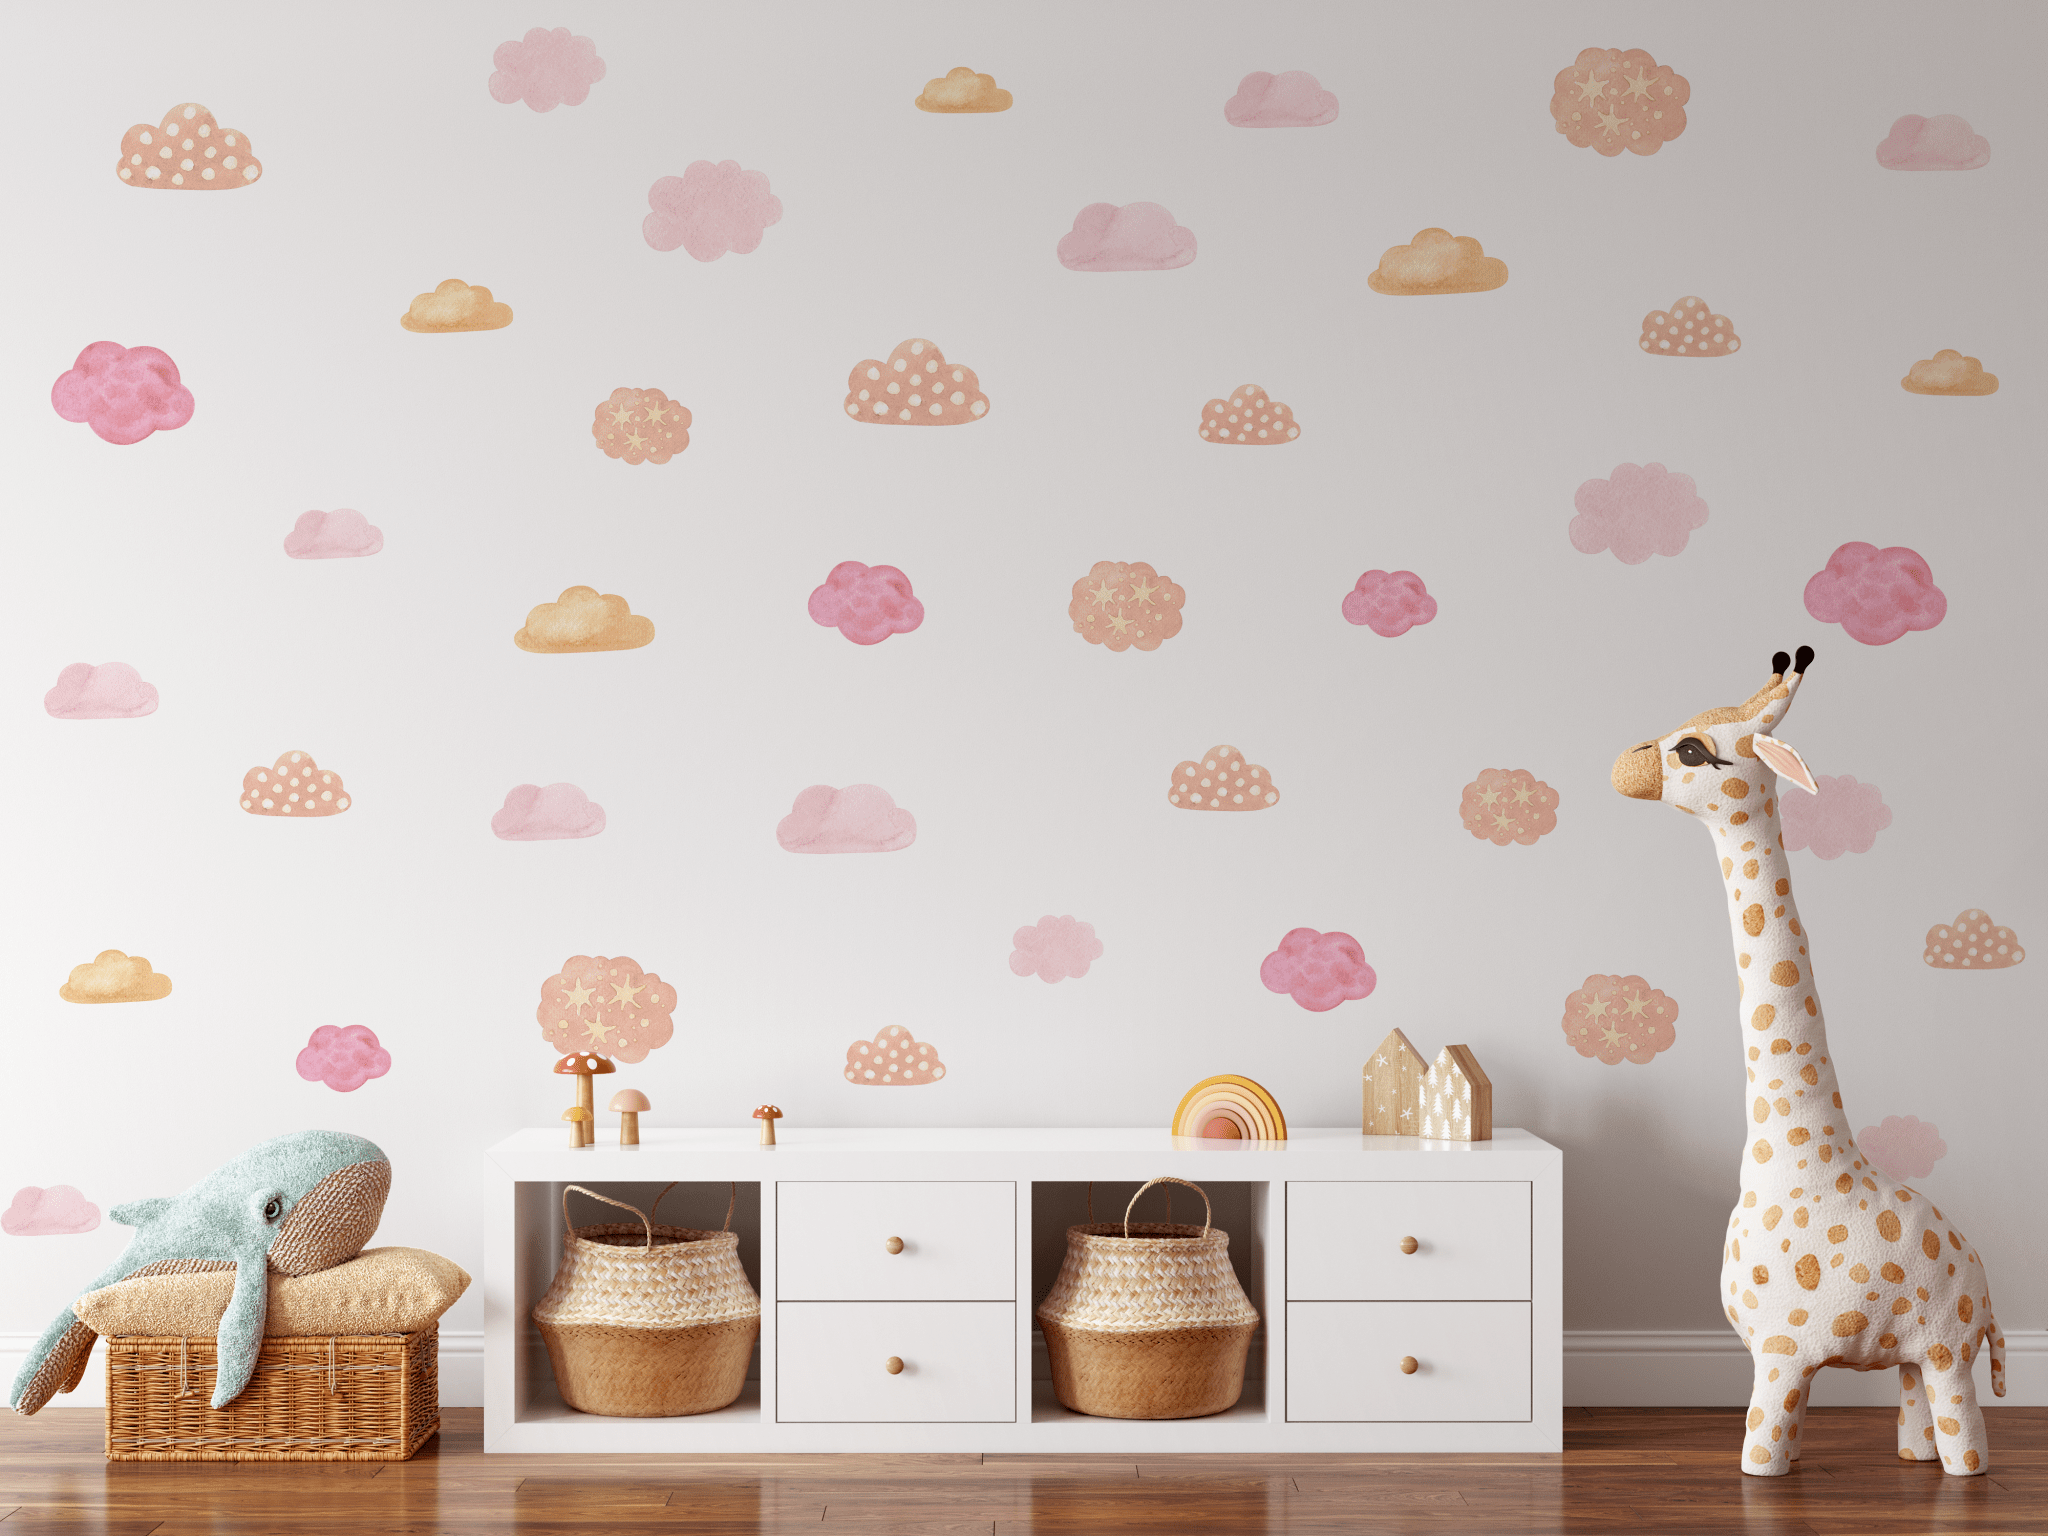 A child's room with a white wall adorned with pink and orange pastel cloud decals, a stuffed blue whale on a wicker basket, and a tall giraffe toy next to a white storage unit.